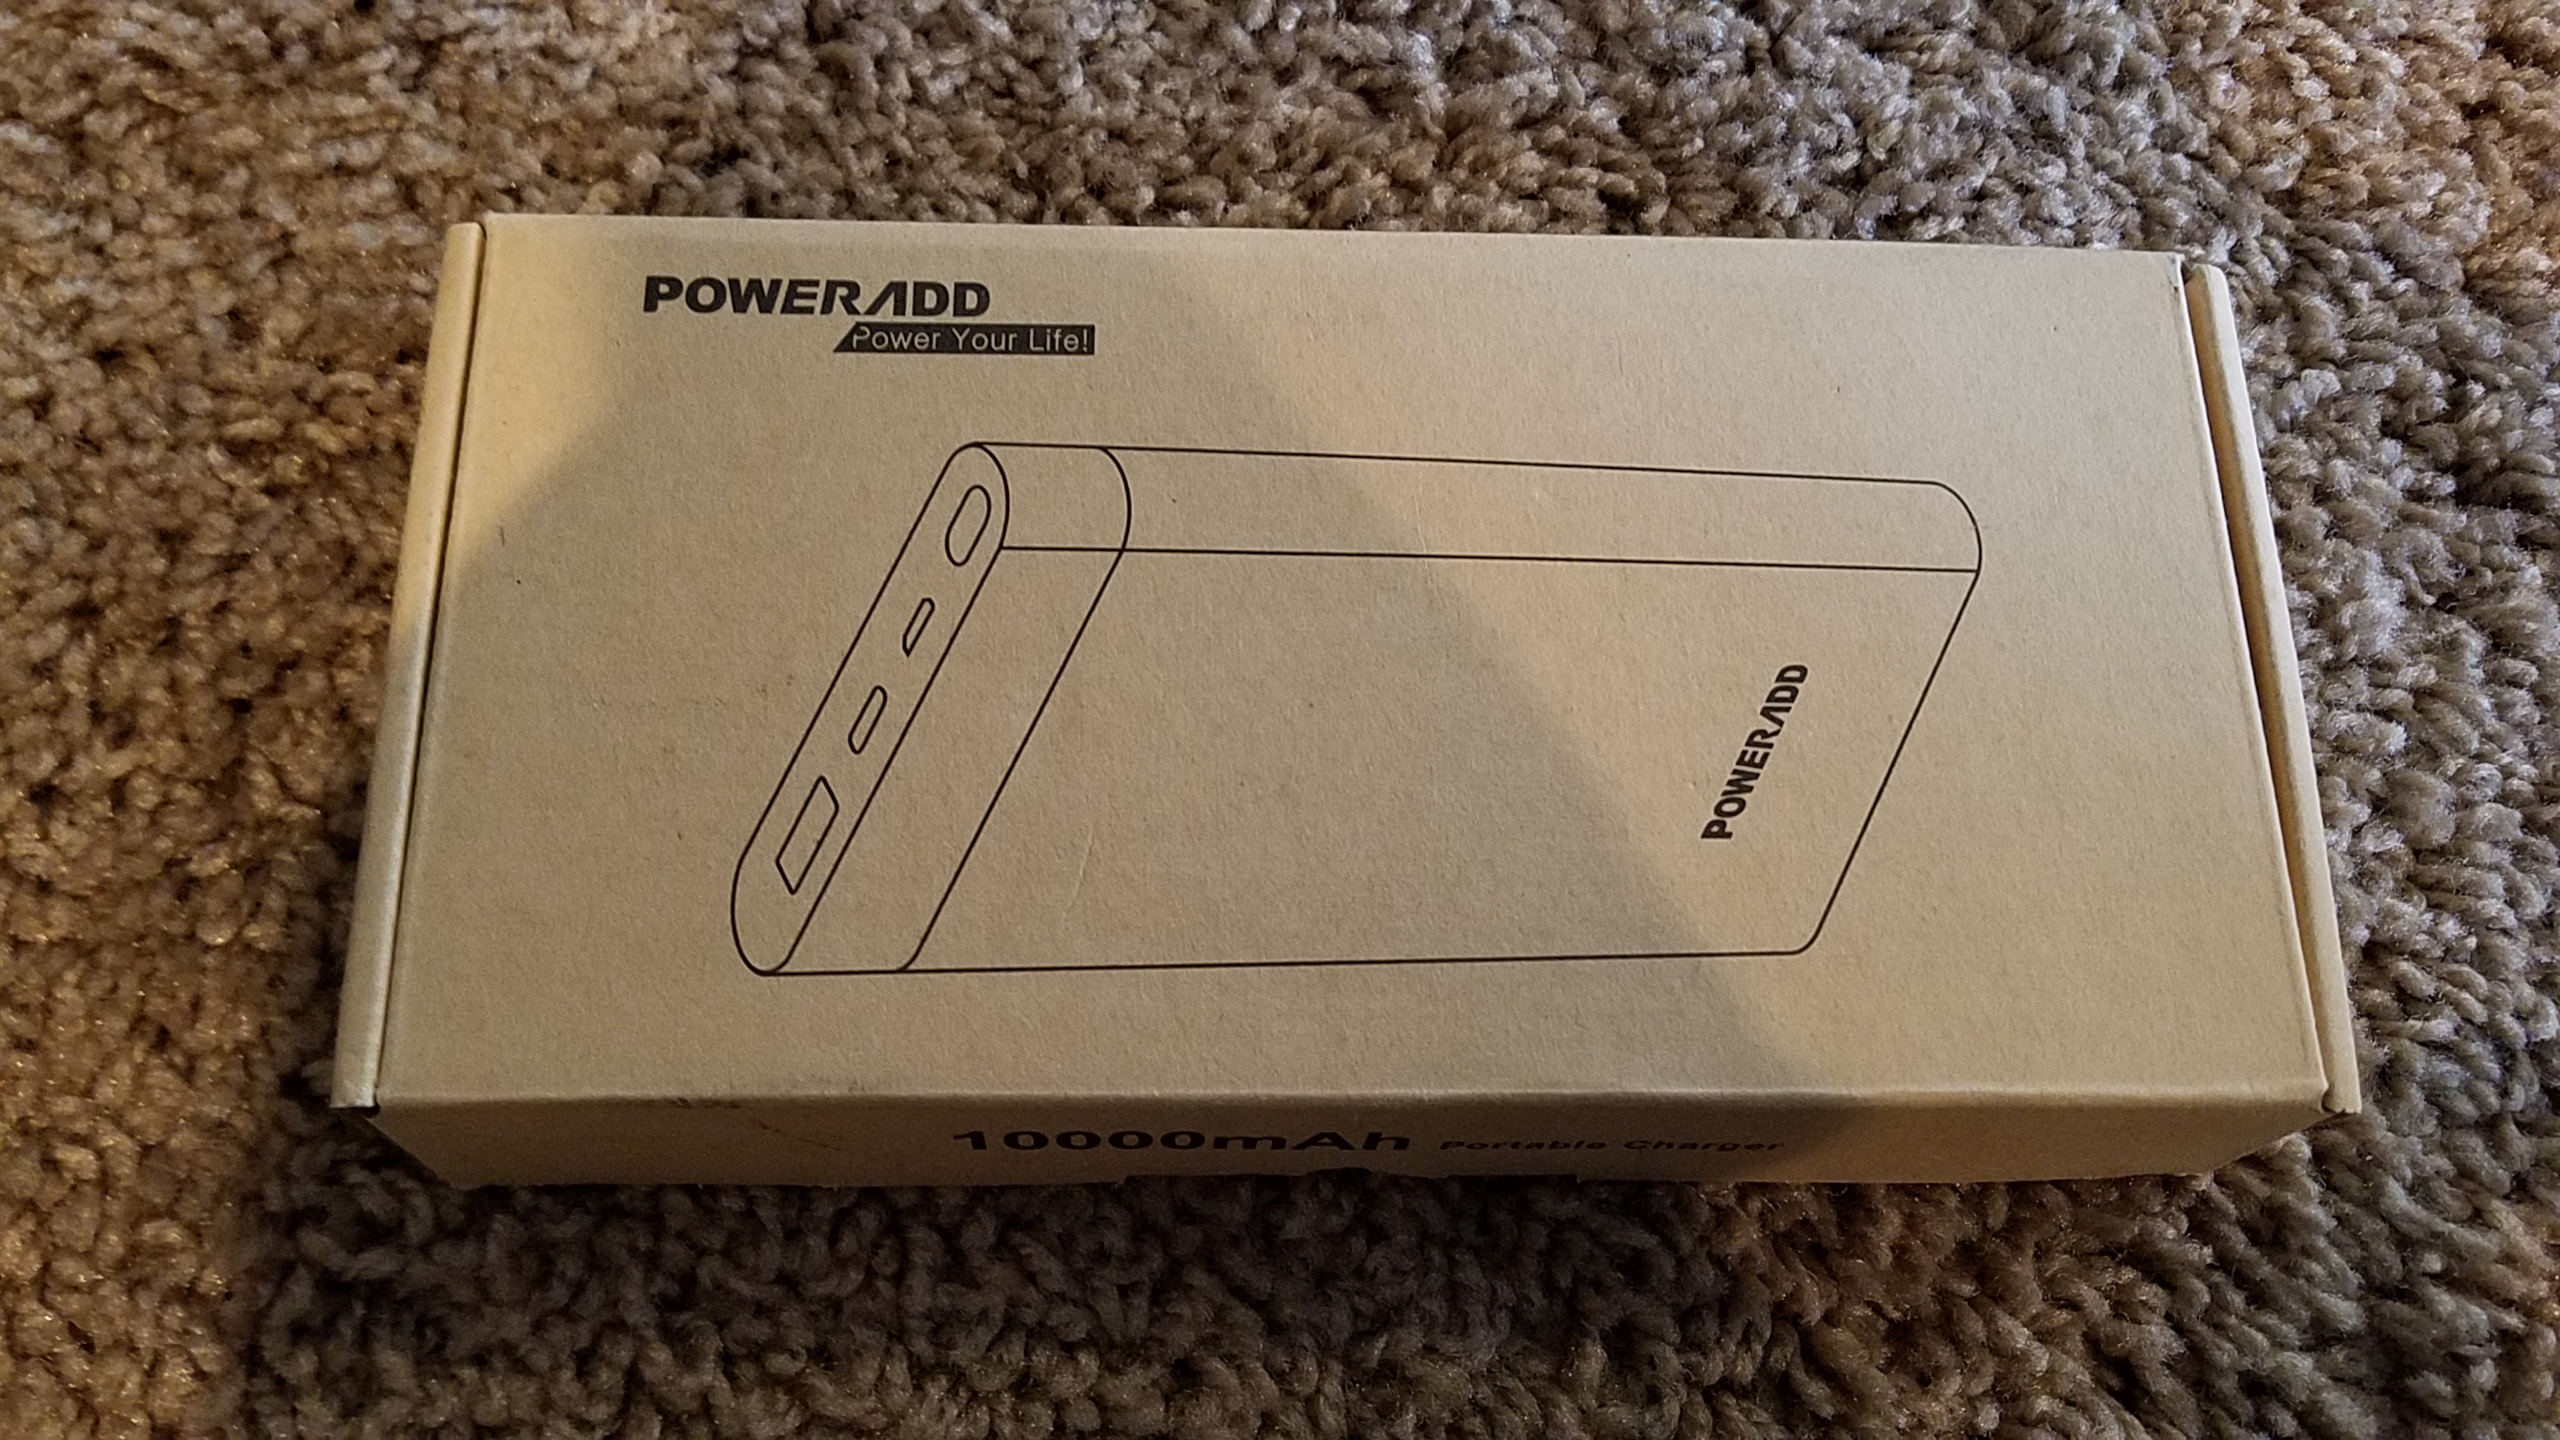 Nicely terminated power bank.